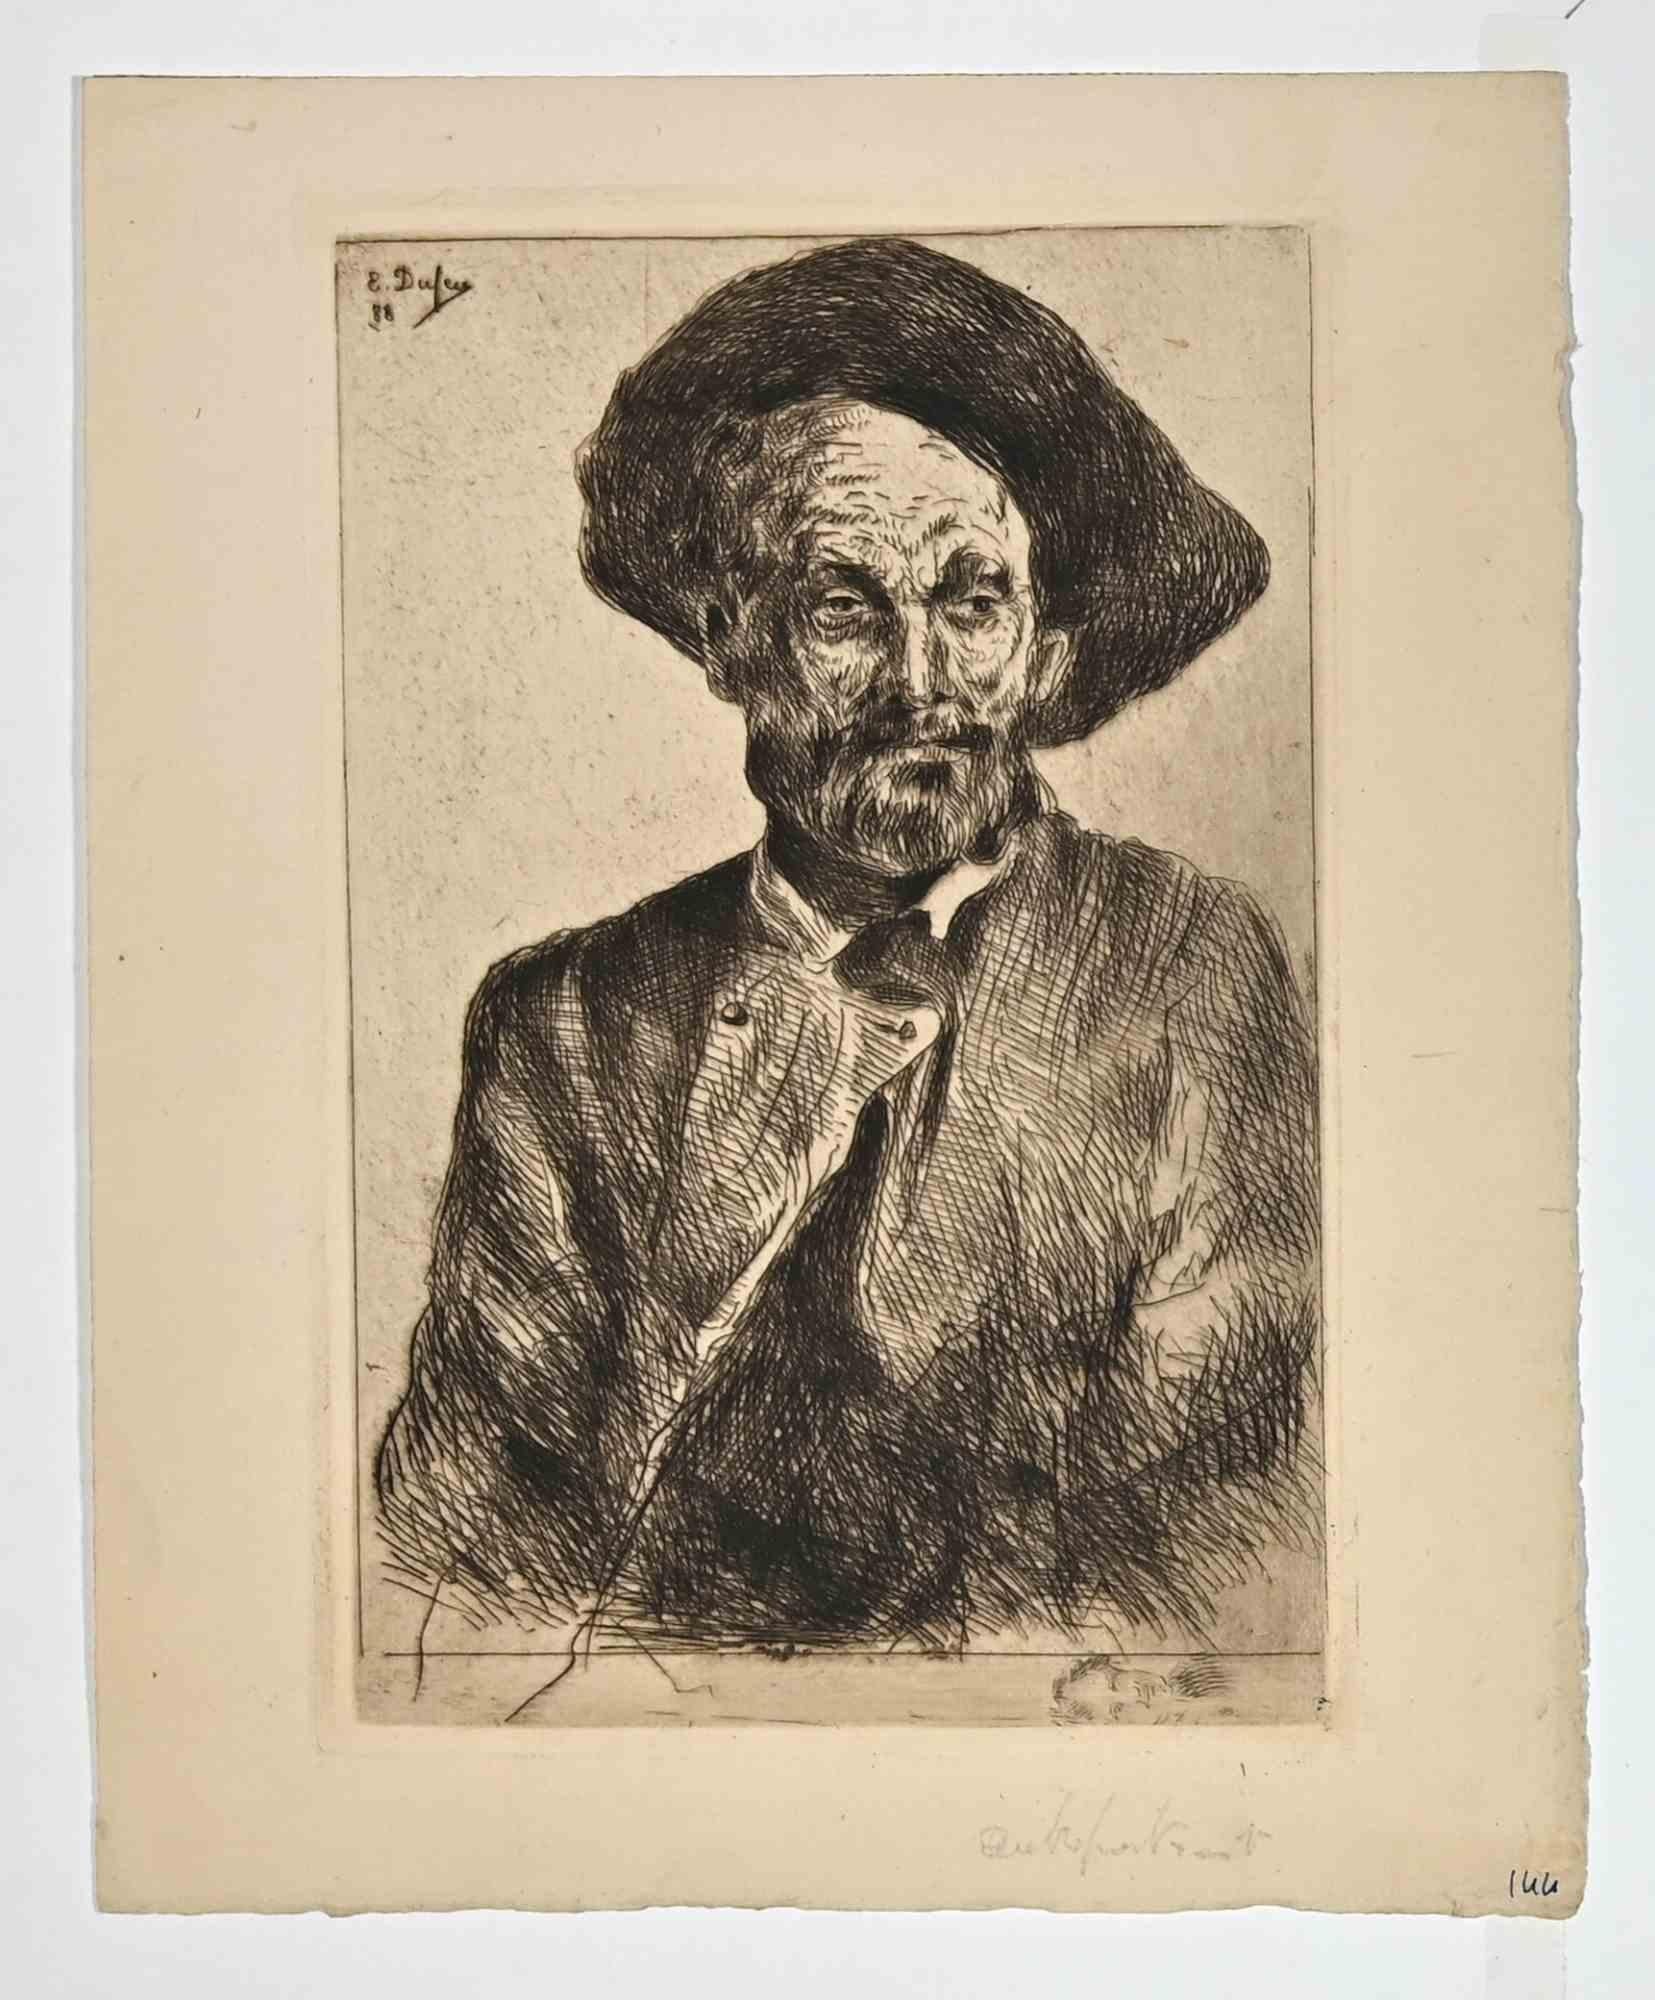 Self-Portrait is an etching realized by Edouard Dufeu (1840-1900).

Proof artist, good condition, included a white cardboard passpartout (49x35 cm).

Signed and dated on the upper left corner.

Edouard Jacques Dufeu, was born in Marseilles on March